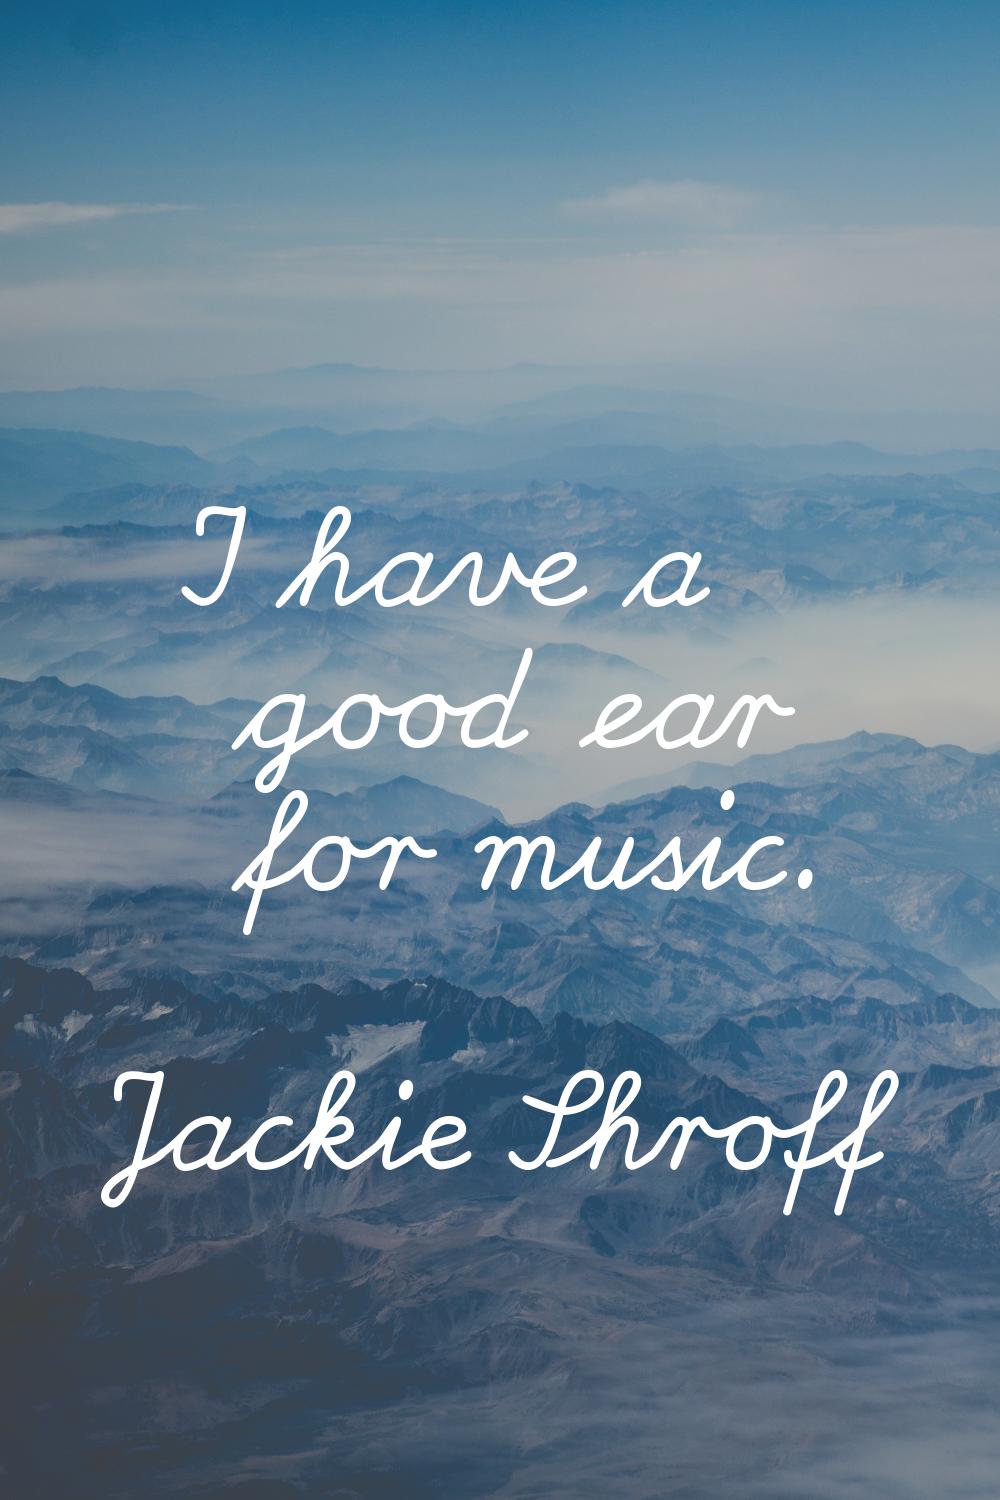 I have a good ear for music.